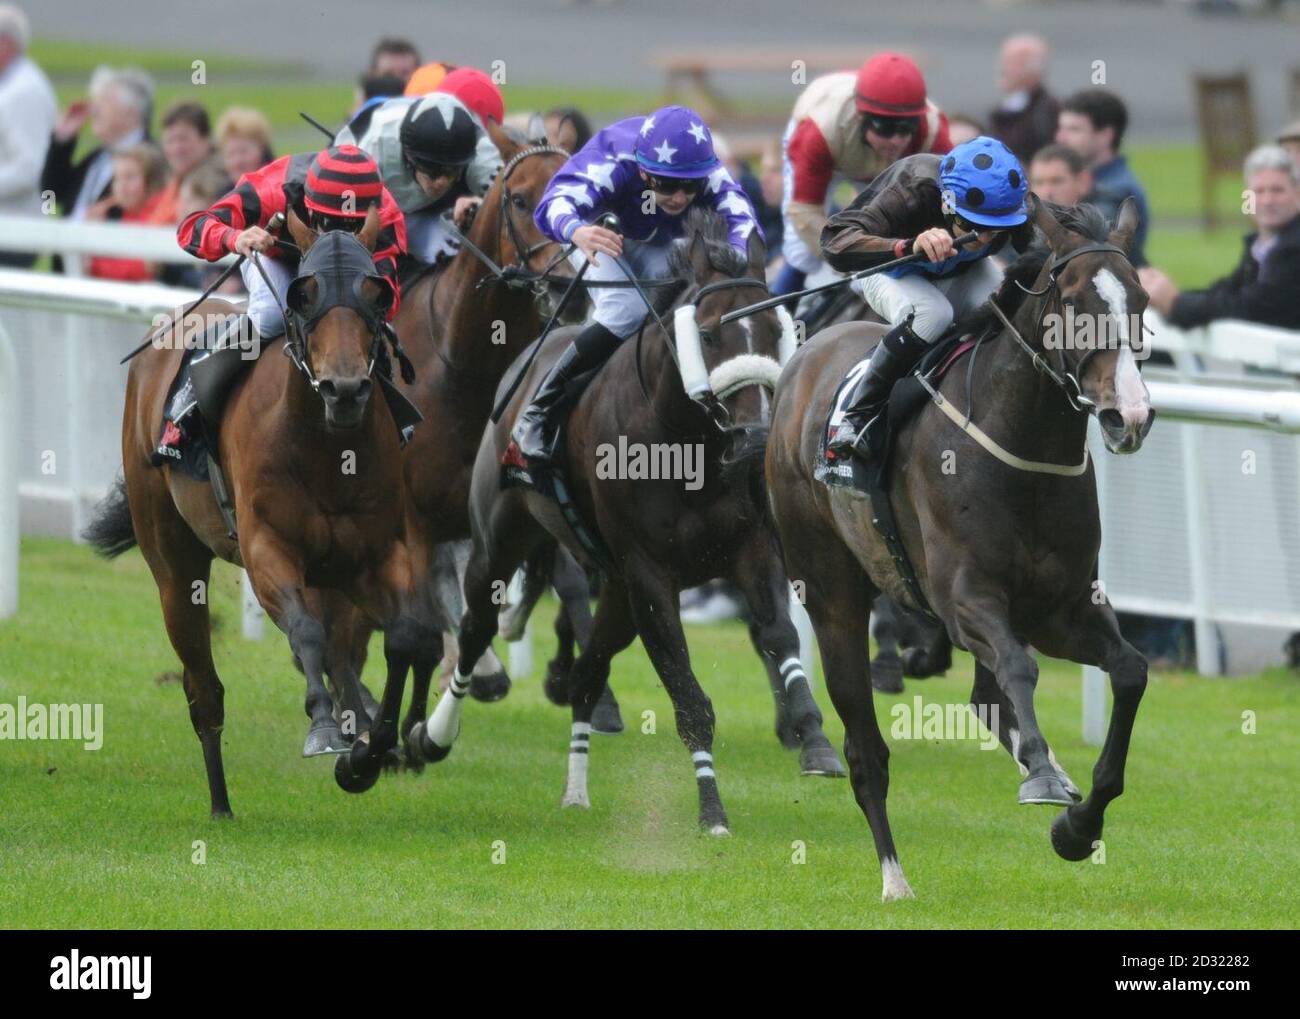 Cape of Approval ridden by Wayne Lordan wins The Gain Elite 10 Handicap at Curragh Racecourse, Curragh. Stock Photo